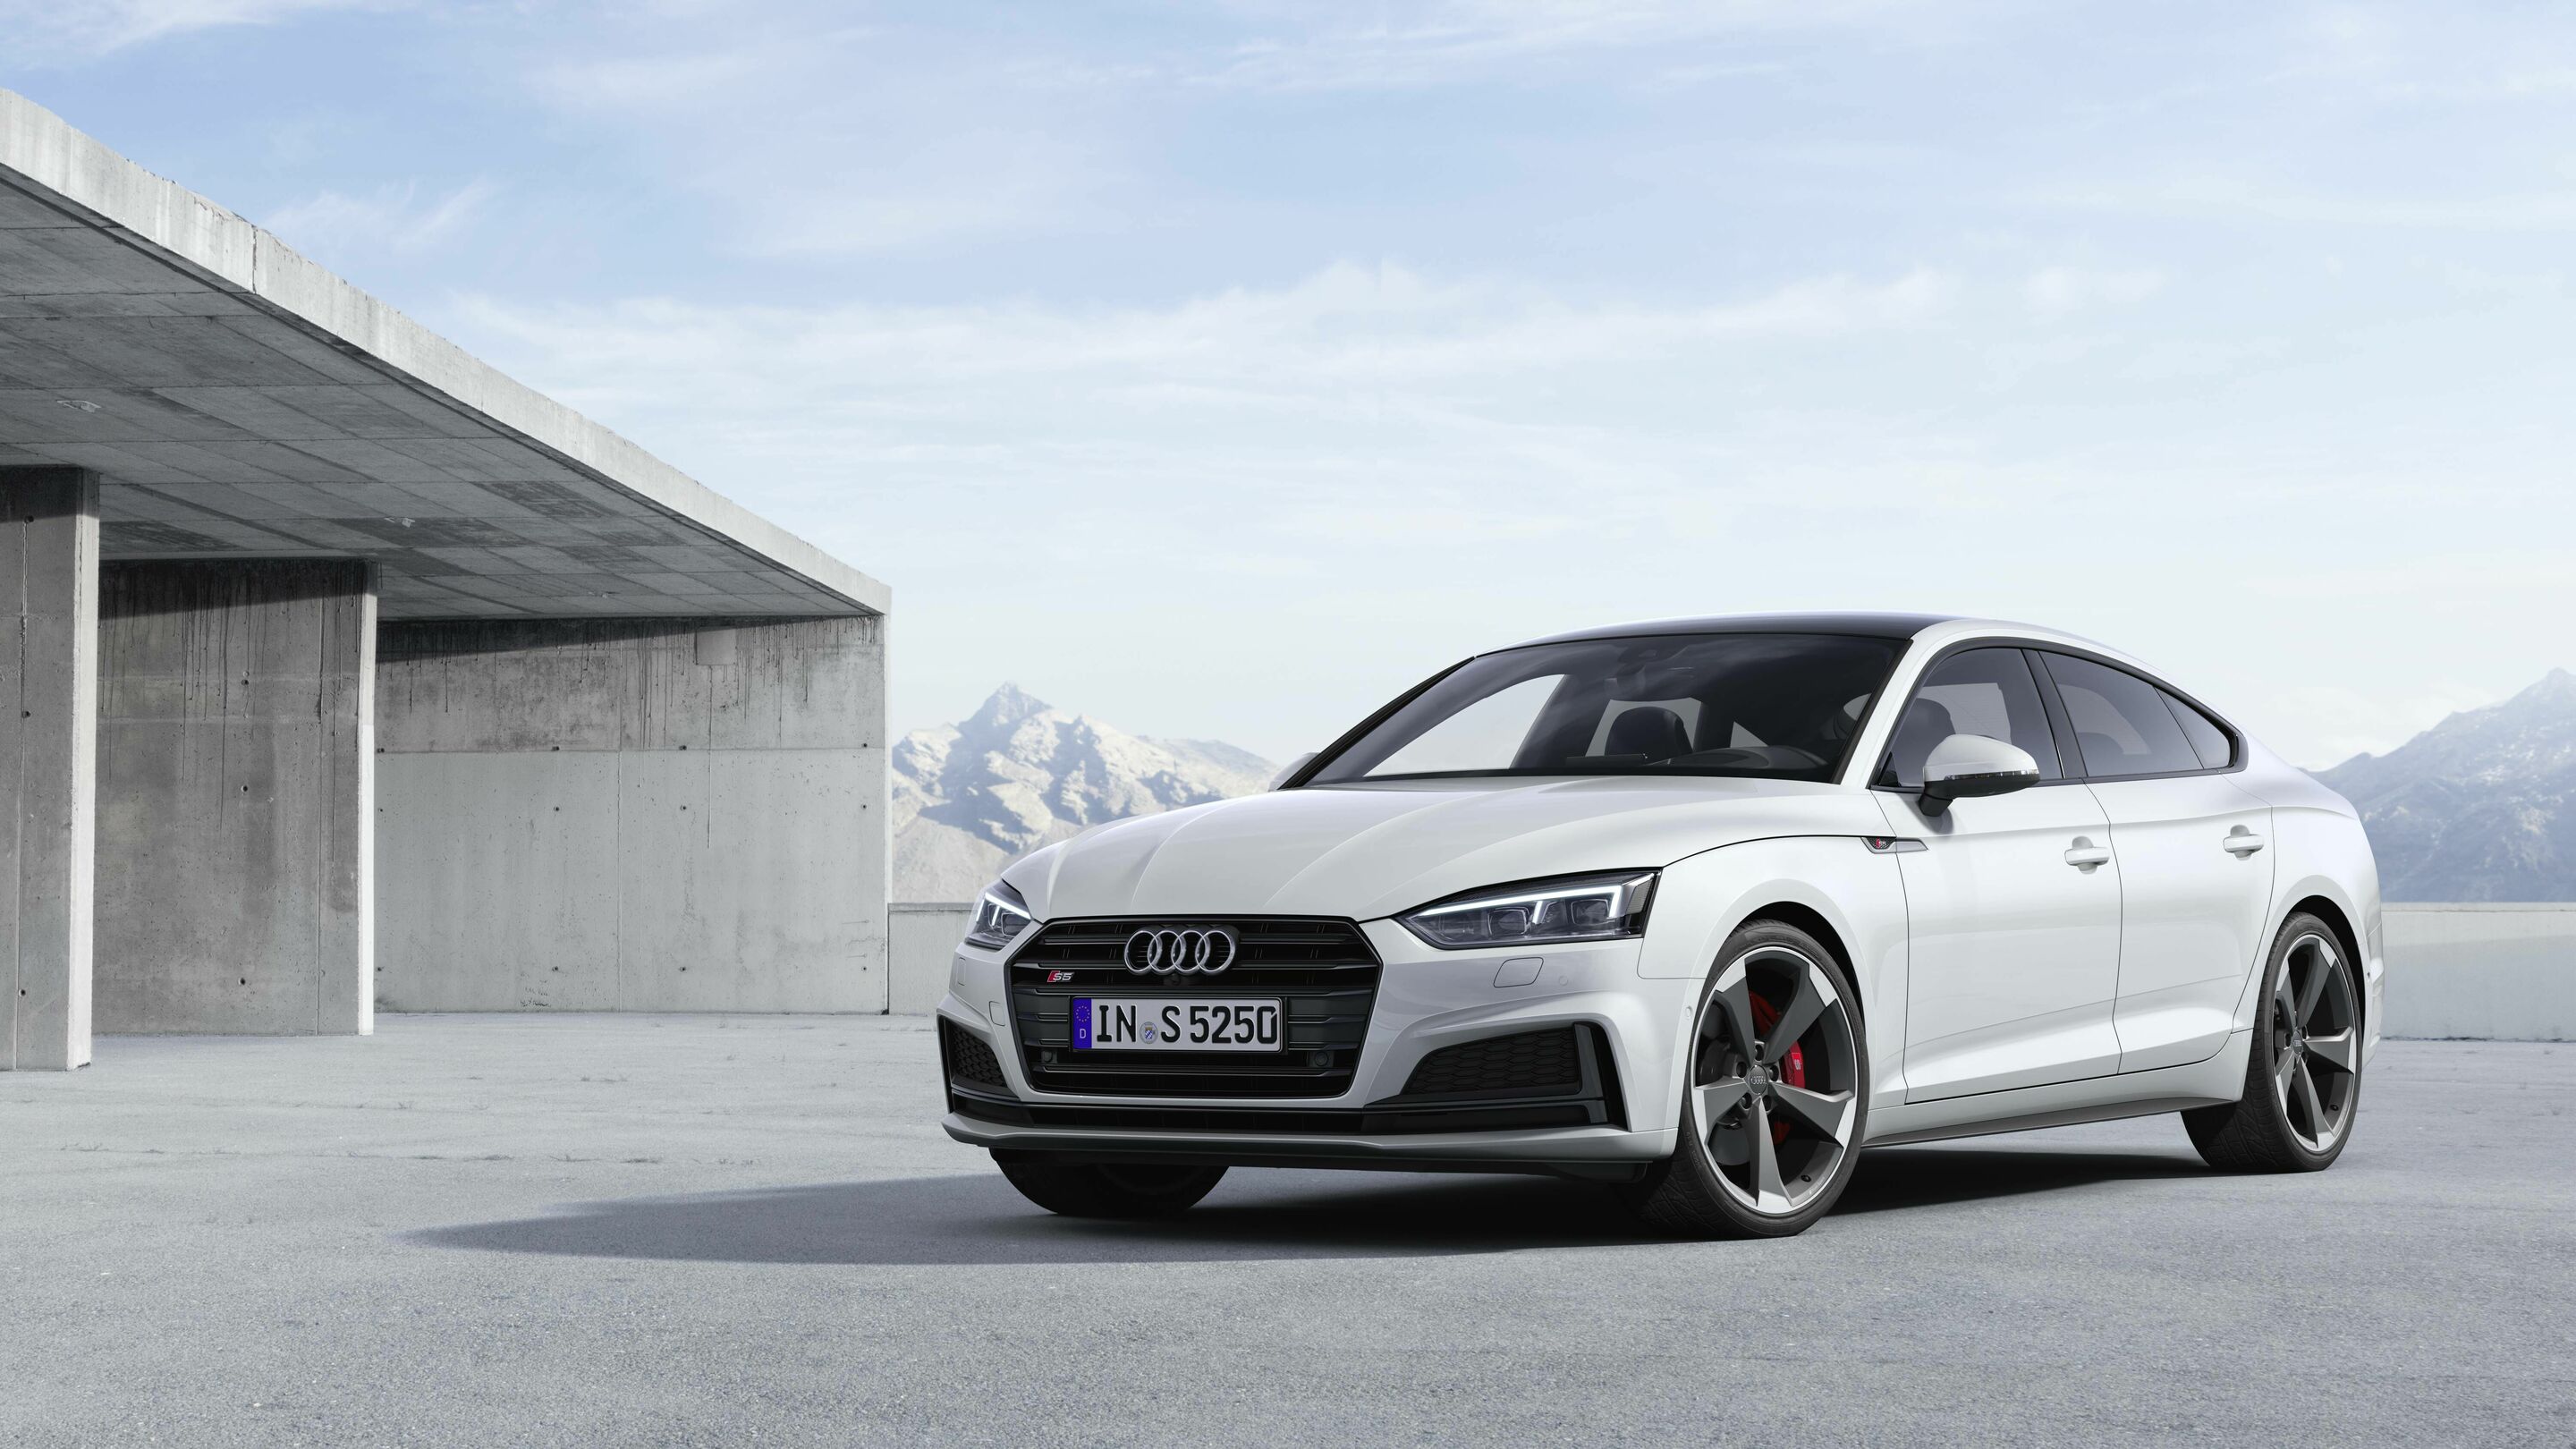 The Audi S5 models now with a TDI engine